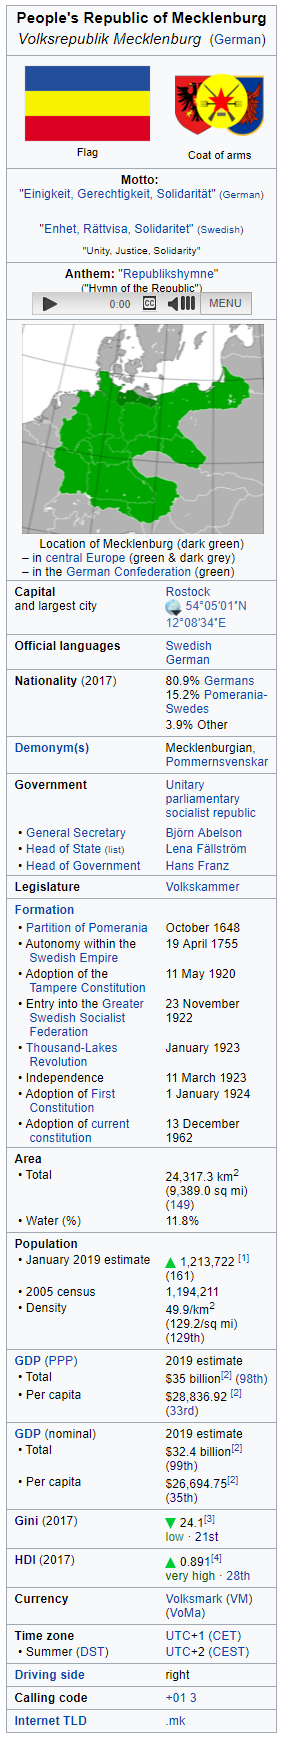 Wikibox for Meck.png